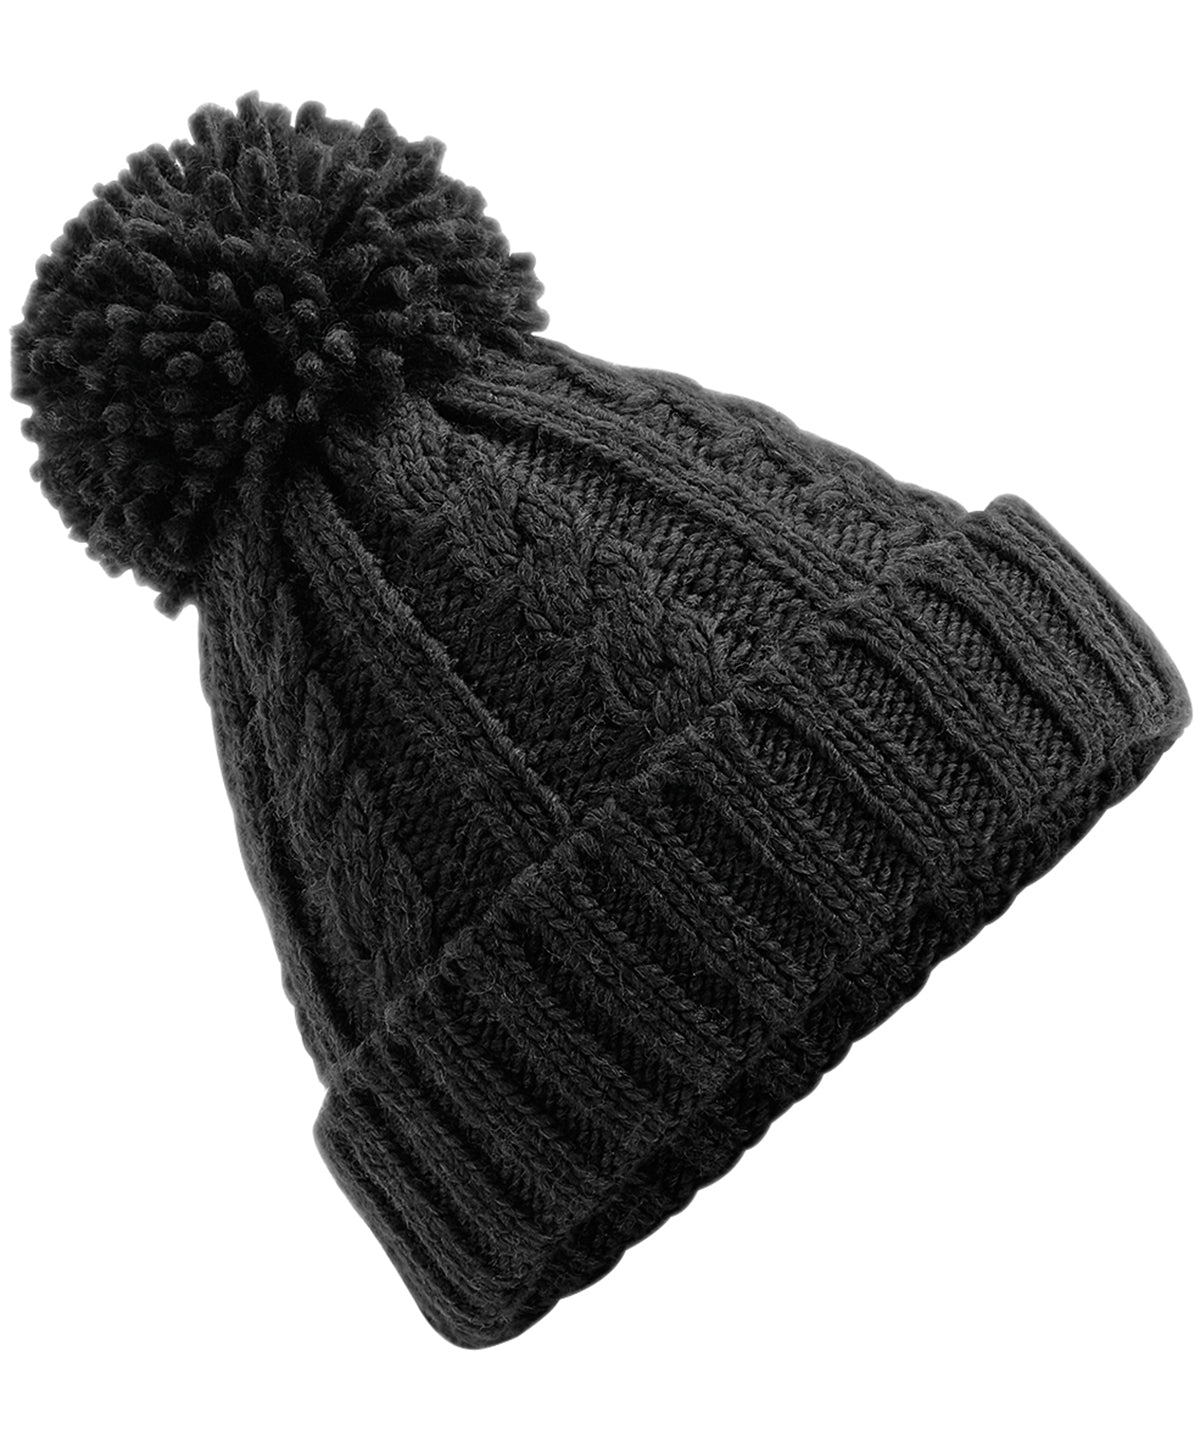 Personalised Hats - Black Beechfield Cable knit melange beanie